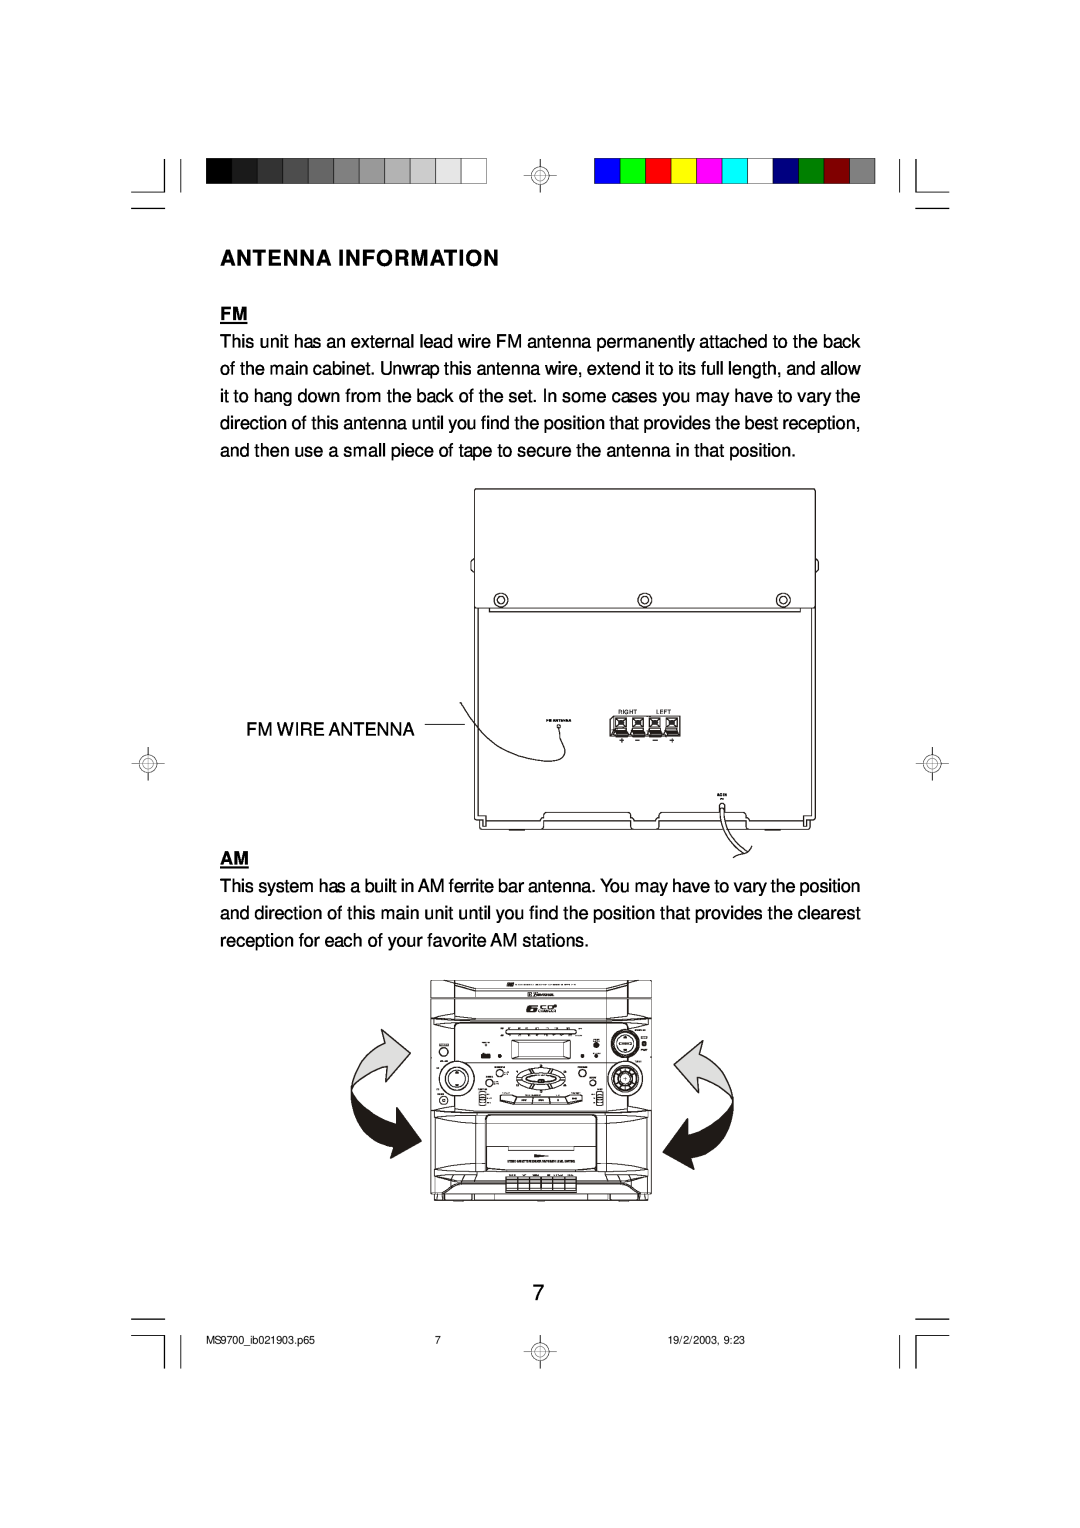 Emerson MS9700 owner manual Antenna Information 